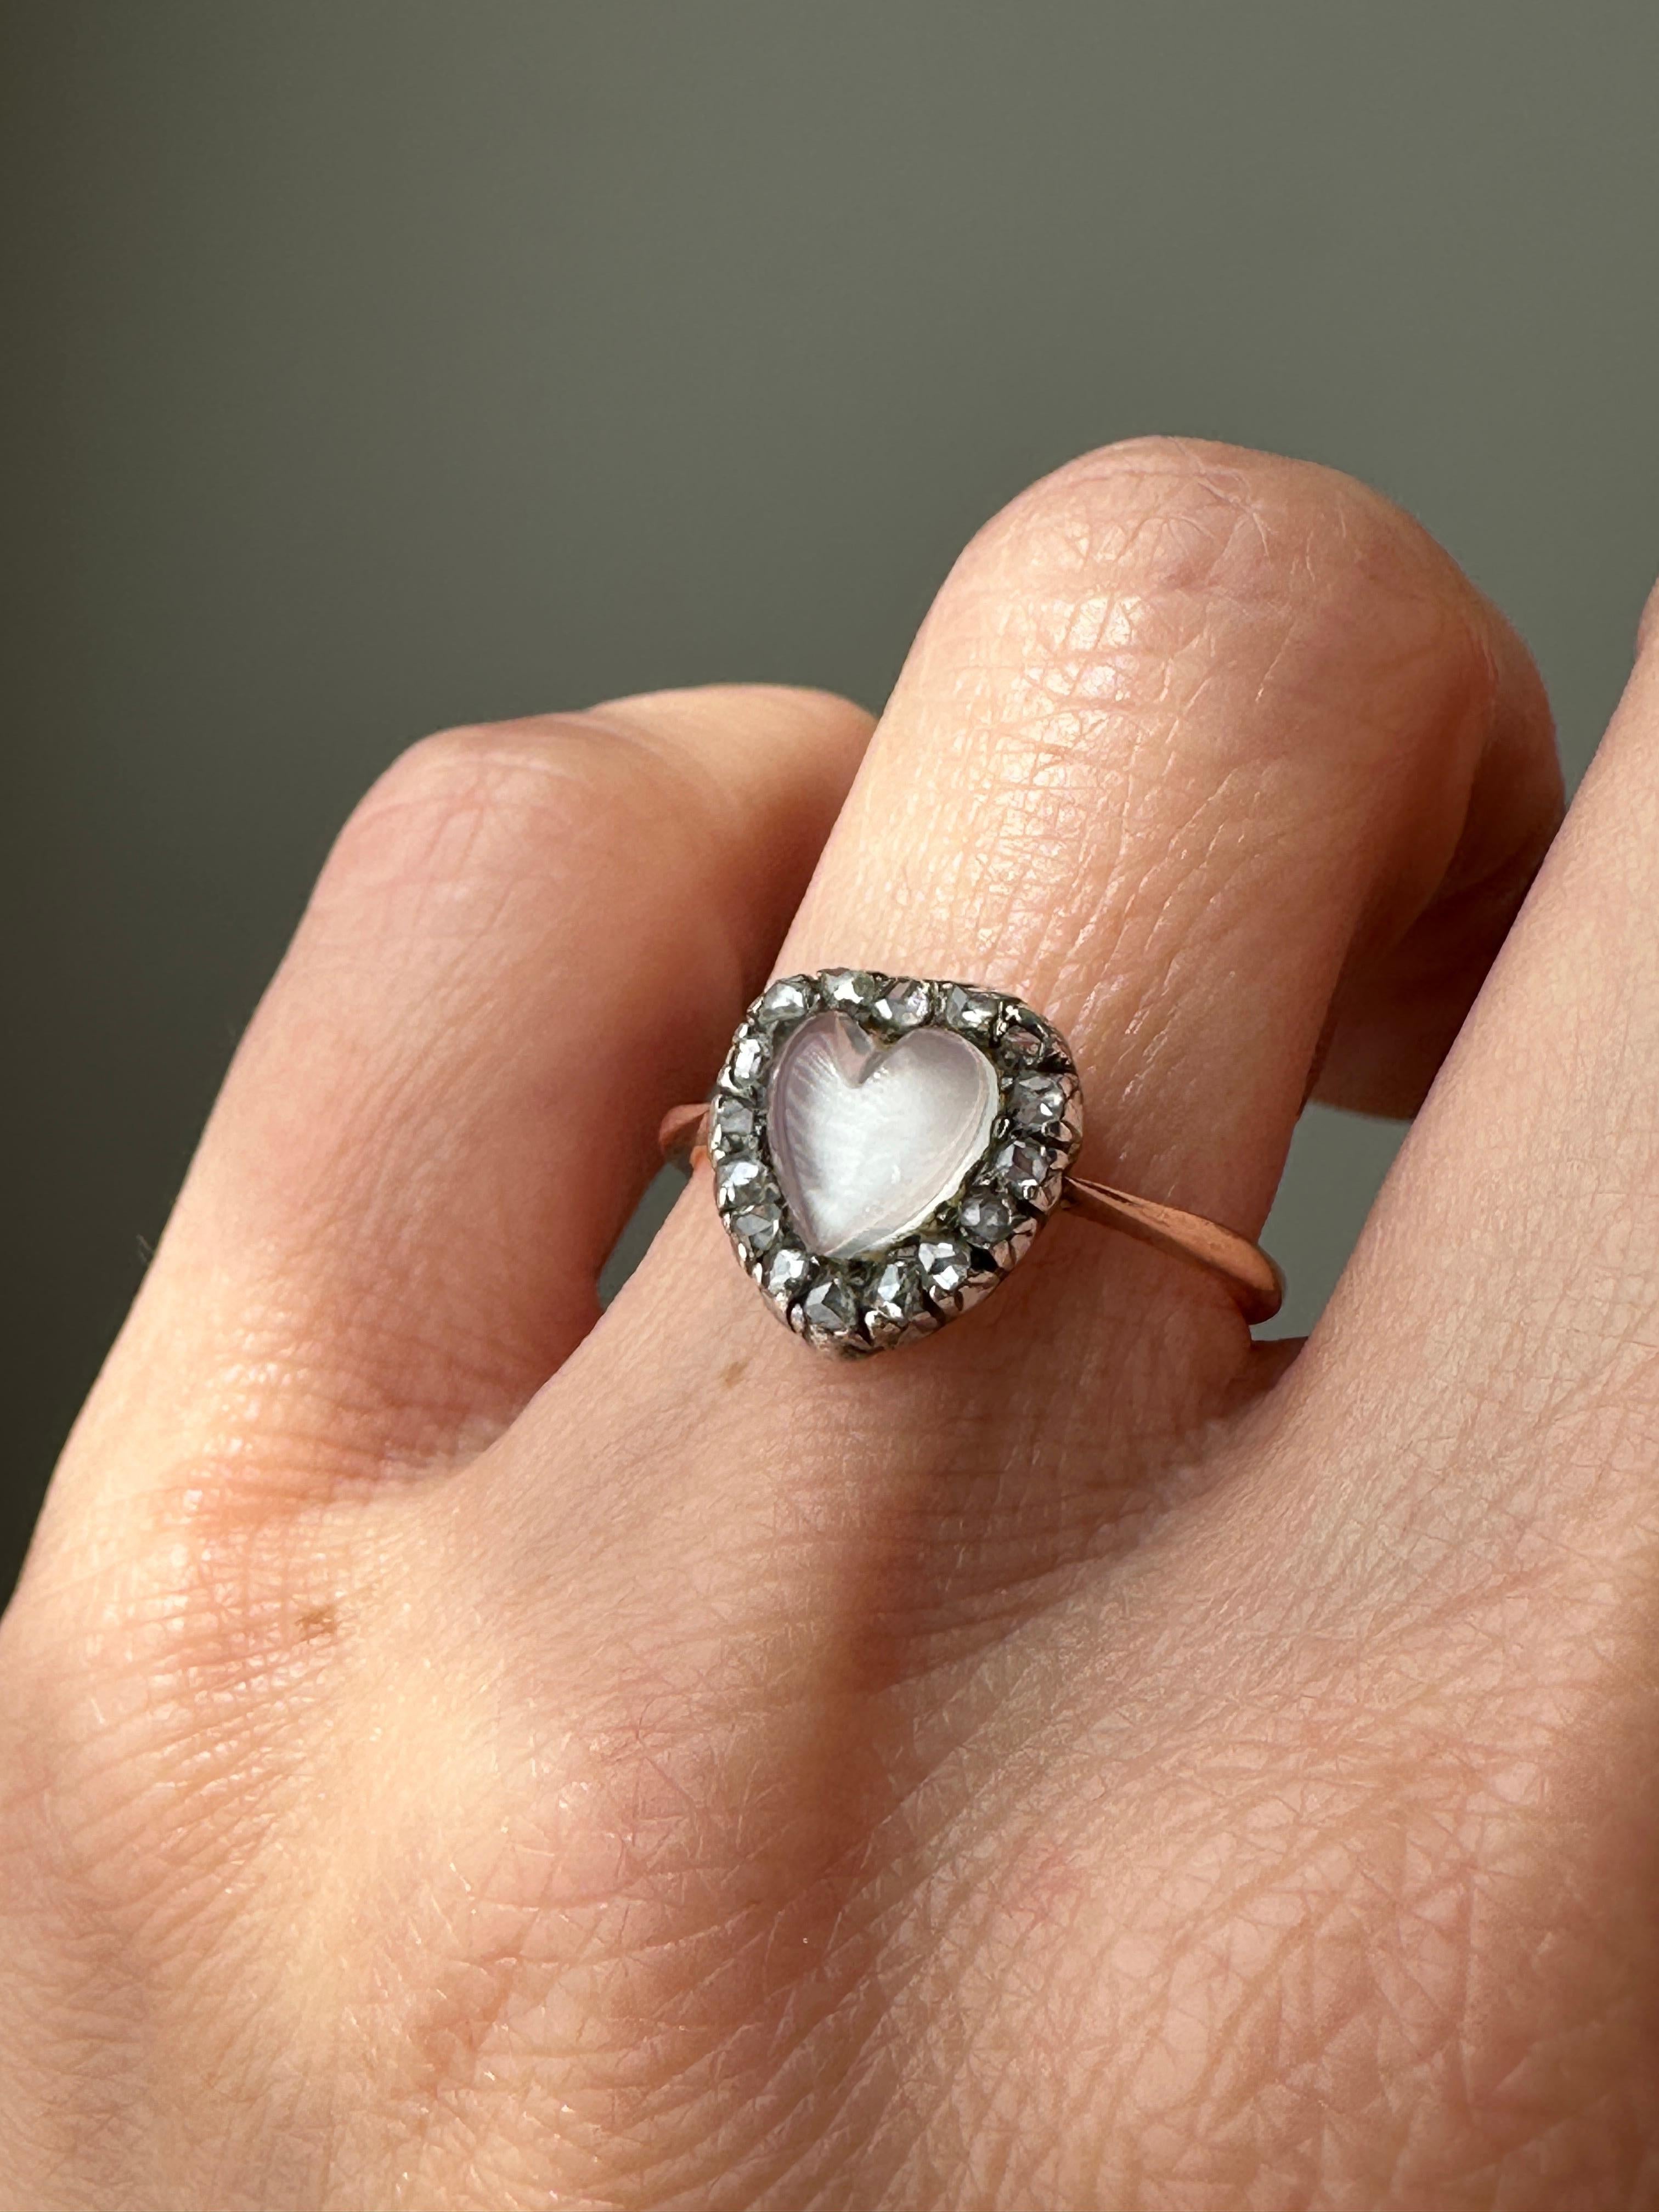 This romantic late Victorian/early Edwardian ring centers on a glowing heart-shaped cabochon moonstone outlined in glittering rose-cut diamonds. Hand fabricated in silver over 9K rose gold. English c 1890. Currently a ring size 5.75

